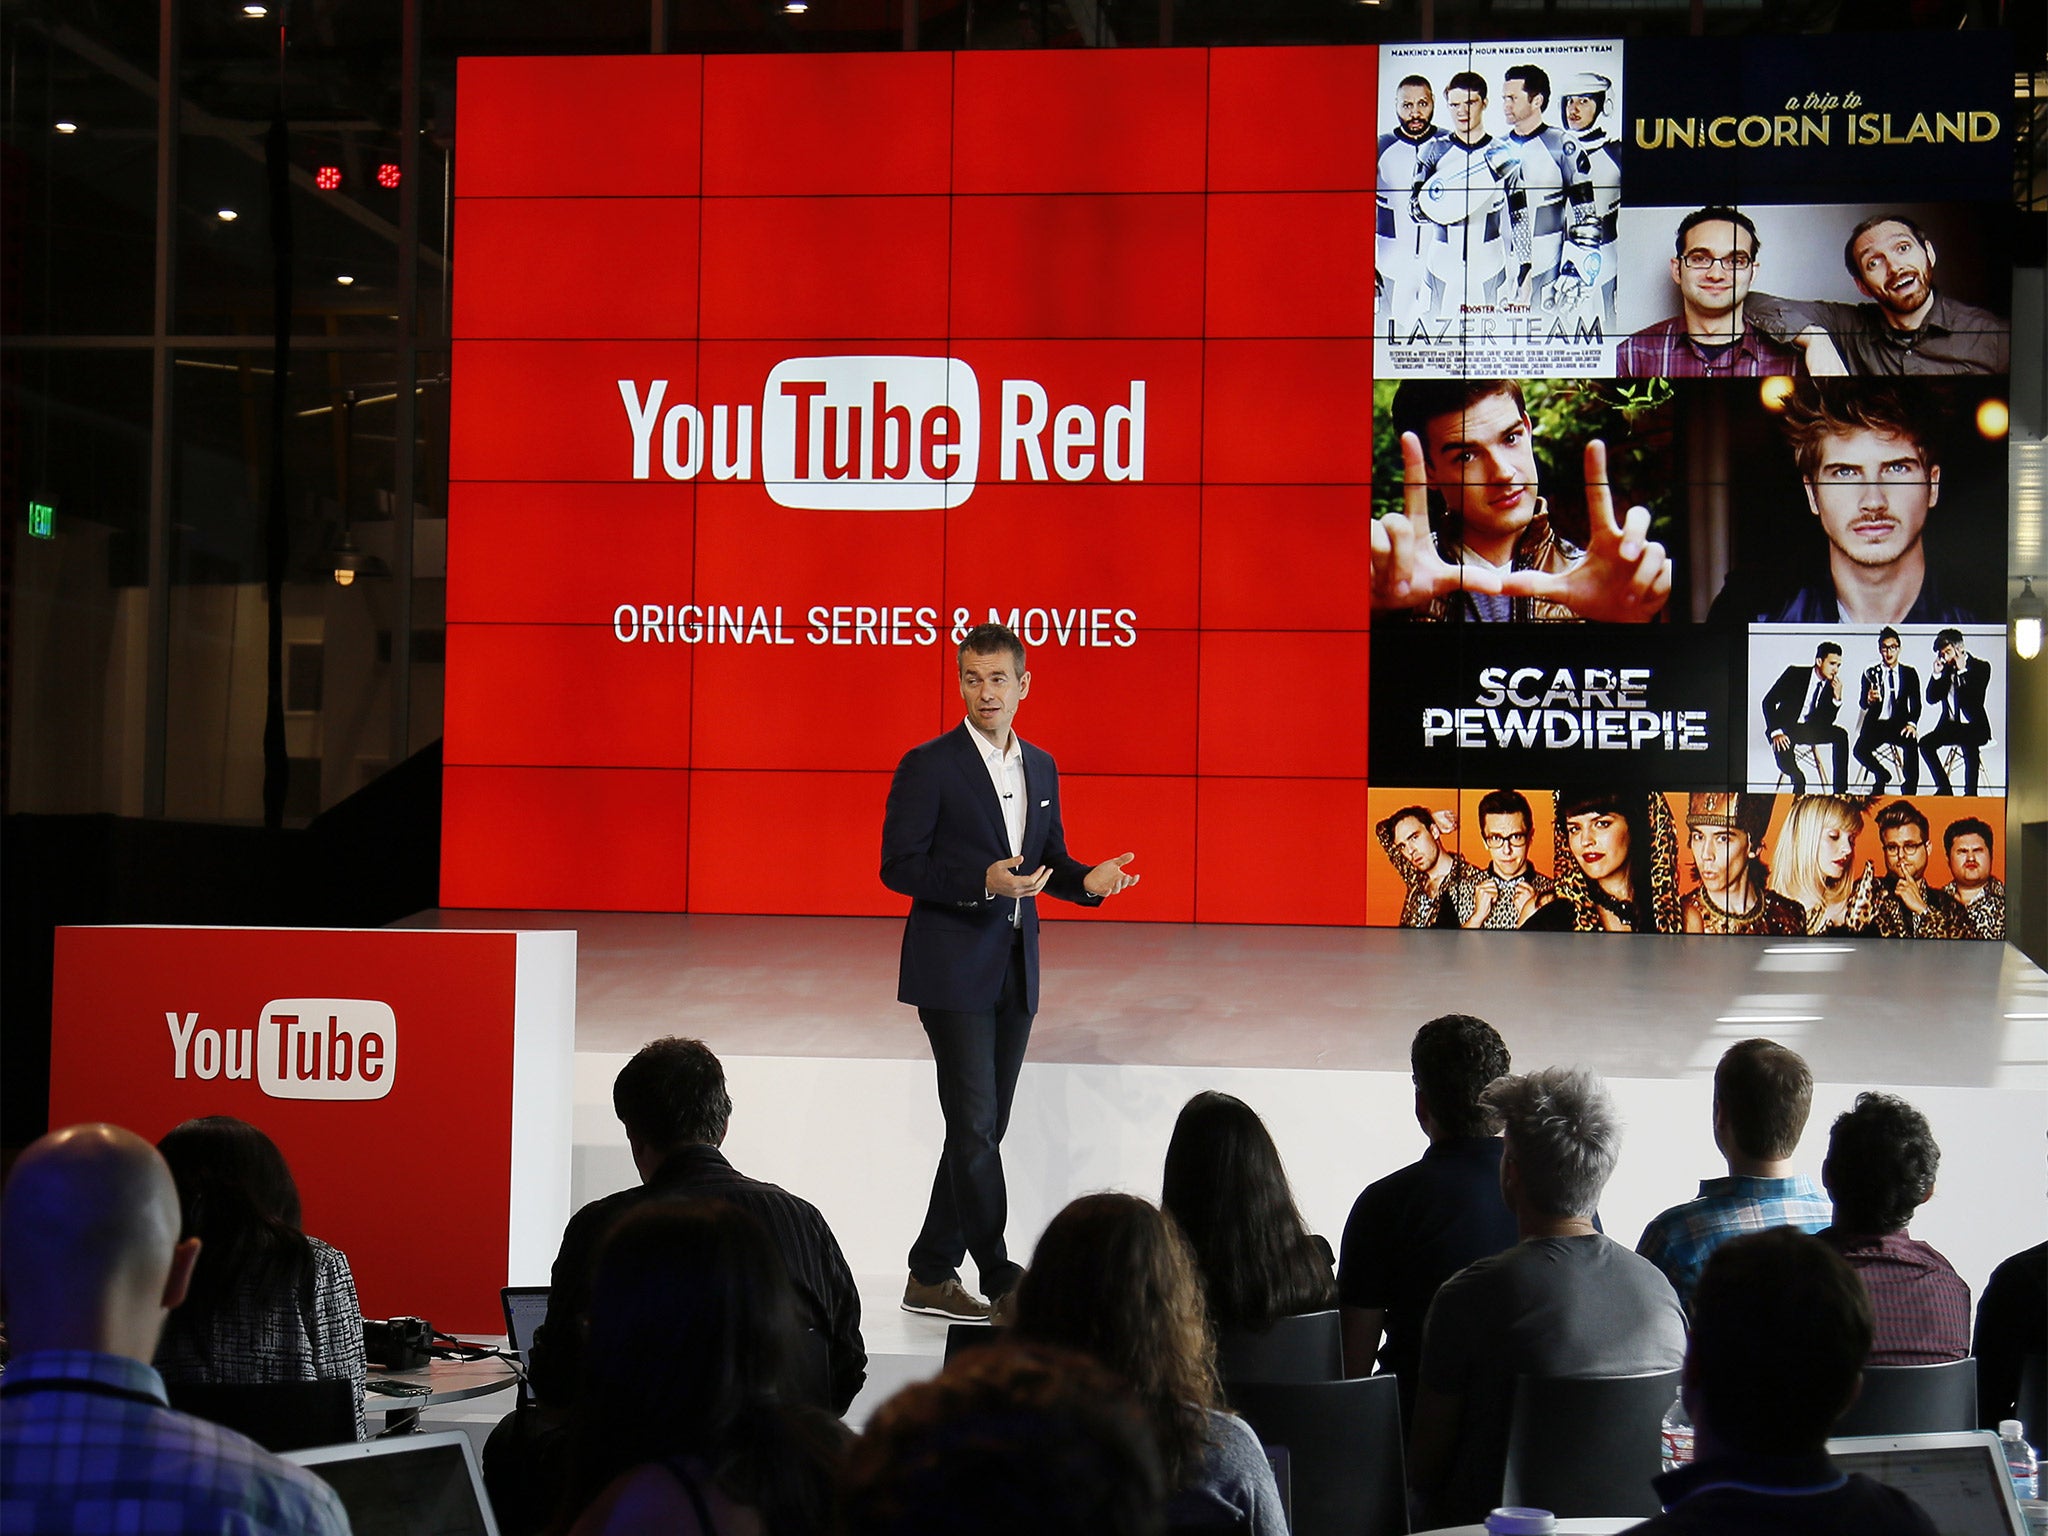 Robert Kyncl, YouTube Chief Business Officer unveils 'YouTube Red' - a new subscription service including original programming, at the company's LA offices